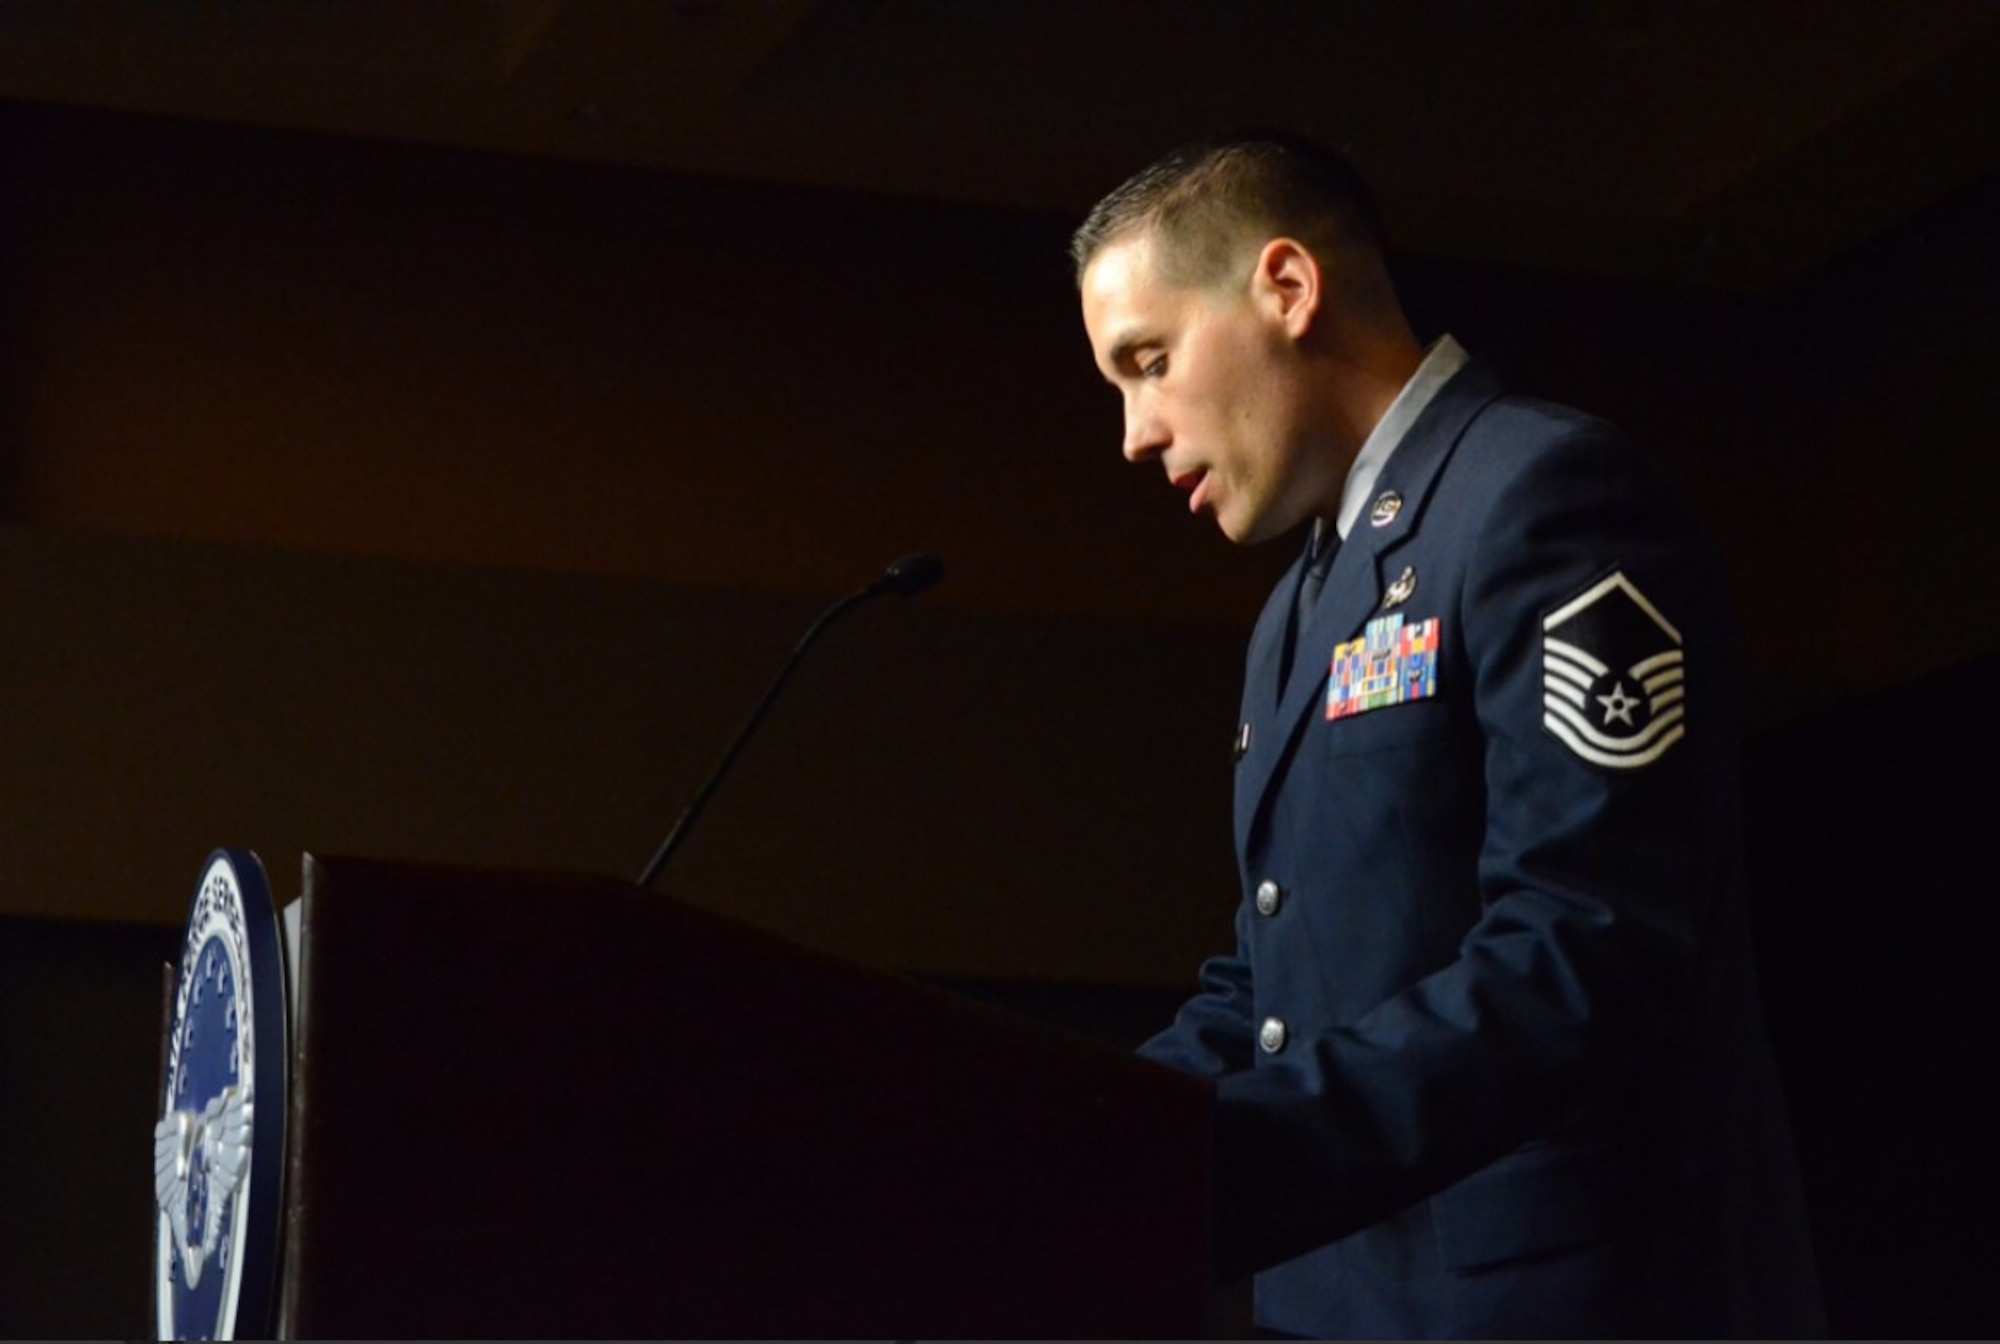 U.S. Air Force Master Sgt. Bryan Bleck, now a U.S. Space Force 2nd Lieutenant for Enterprise Corps Operations Support and Infrastructure branch, emcees at the 2019 Air Force Sergeants Association Professional Airmen’s Conference President’s dinner in San Antonio, Texas. Bleck earned his commission in the Space Force through Officer Training School by being selected for the Senior Leader Enlisted Commissioning Program. (Courtesy photo)